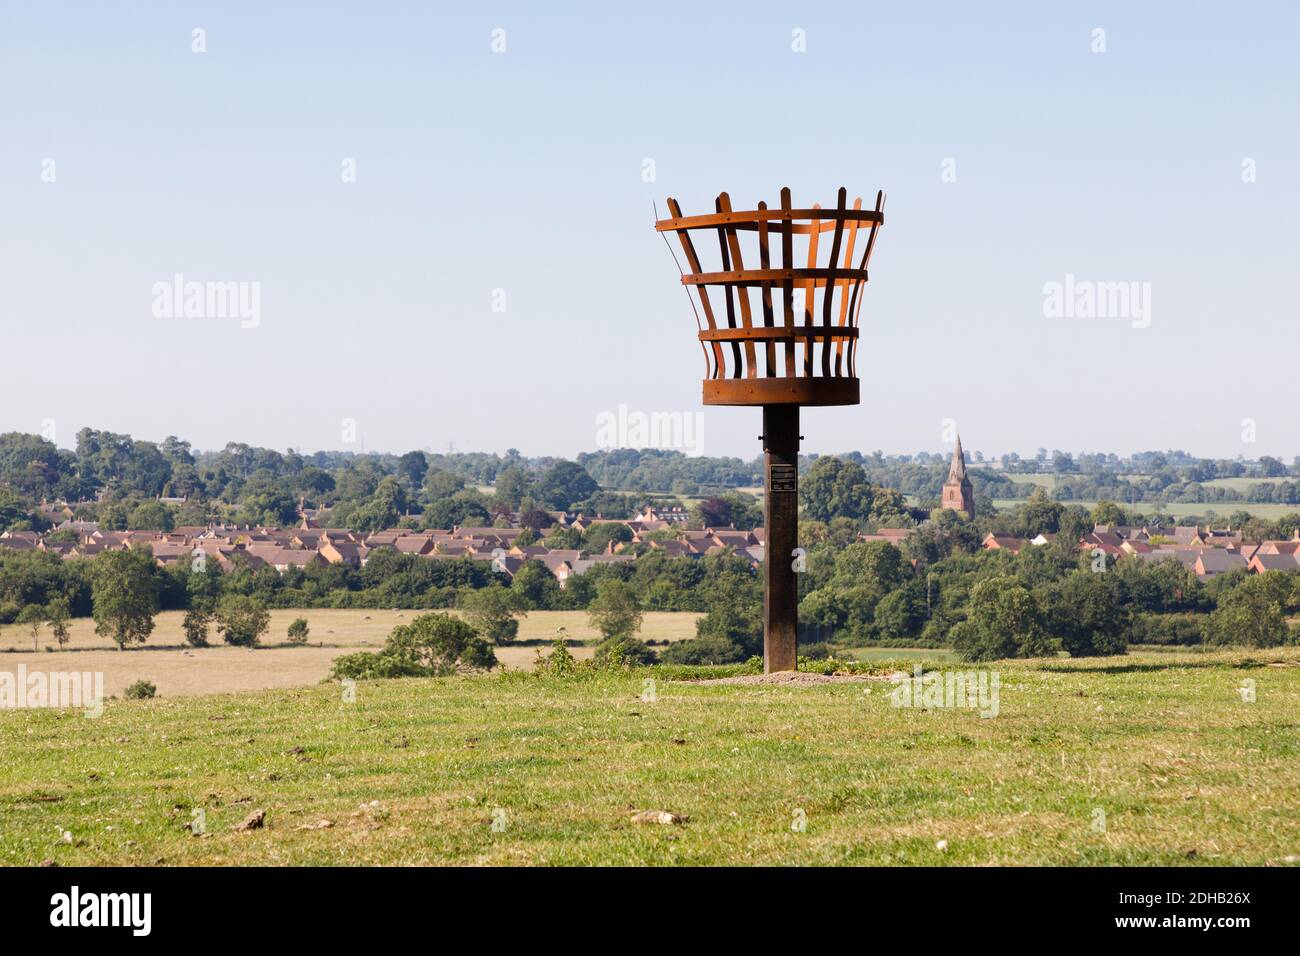 Crick, Northamptonshire - 25/06/20: A metal fire beacon on a hill above the village of Crick and the spire of St. Margaret's church. Stock Photo